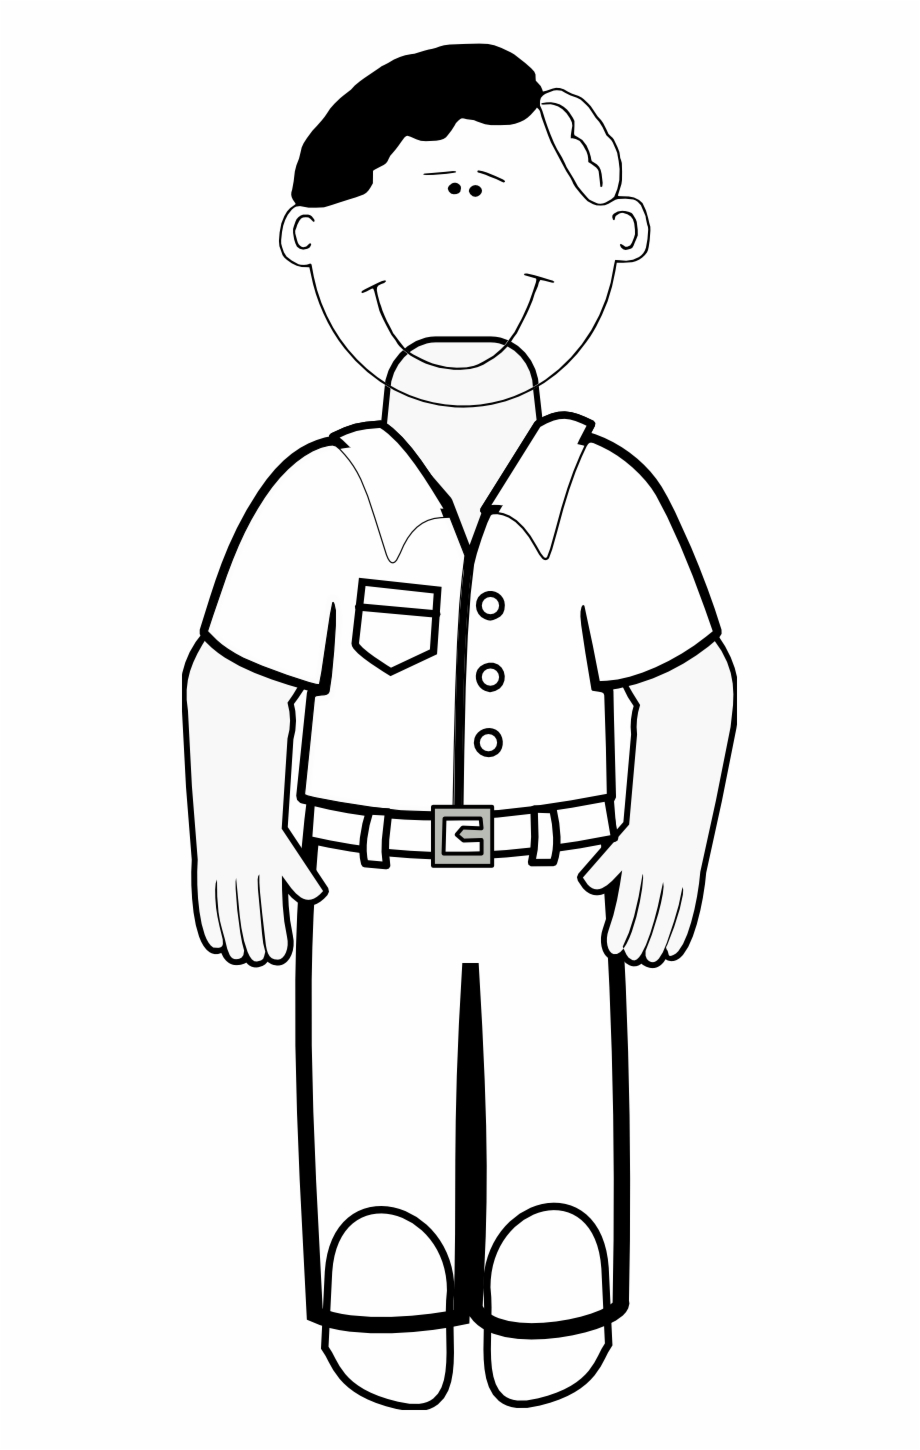 dad clip art black and white
